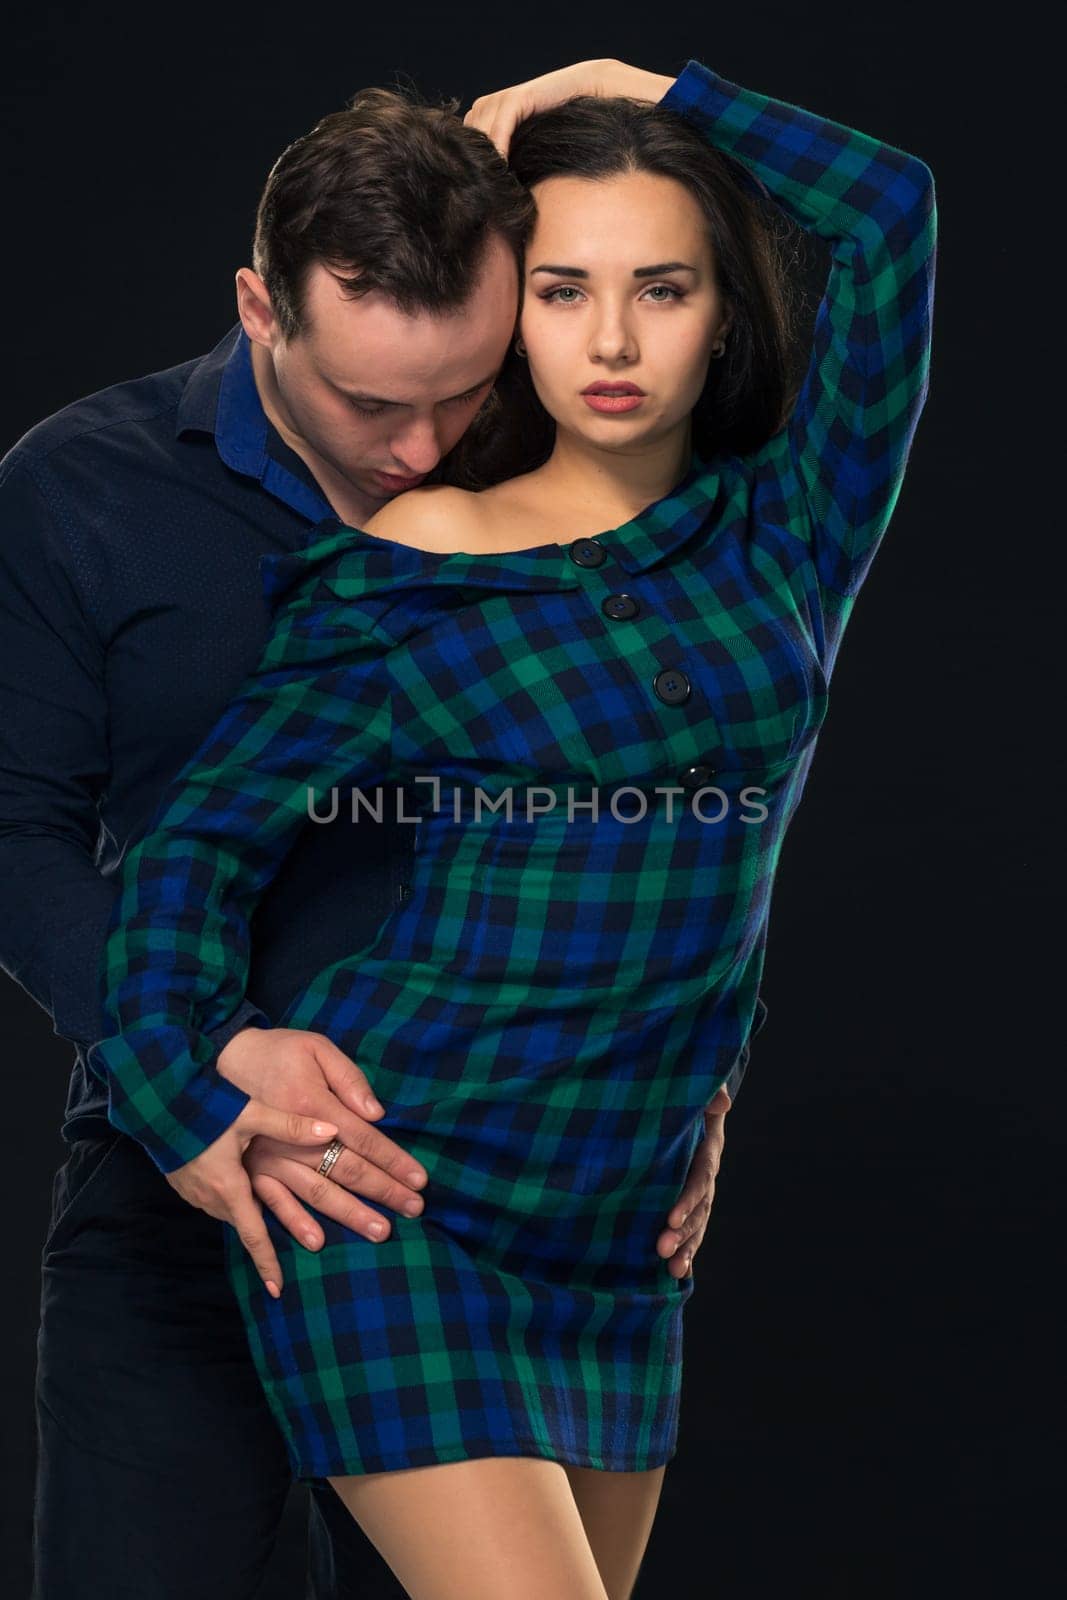 Couple posing in studio. On black background. Young woman in blue checkered dress